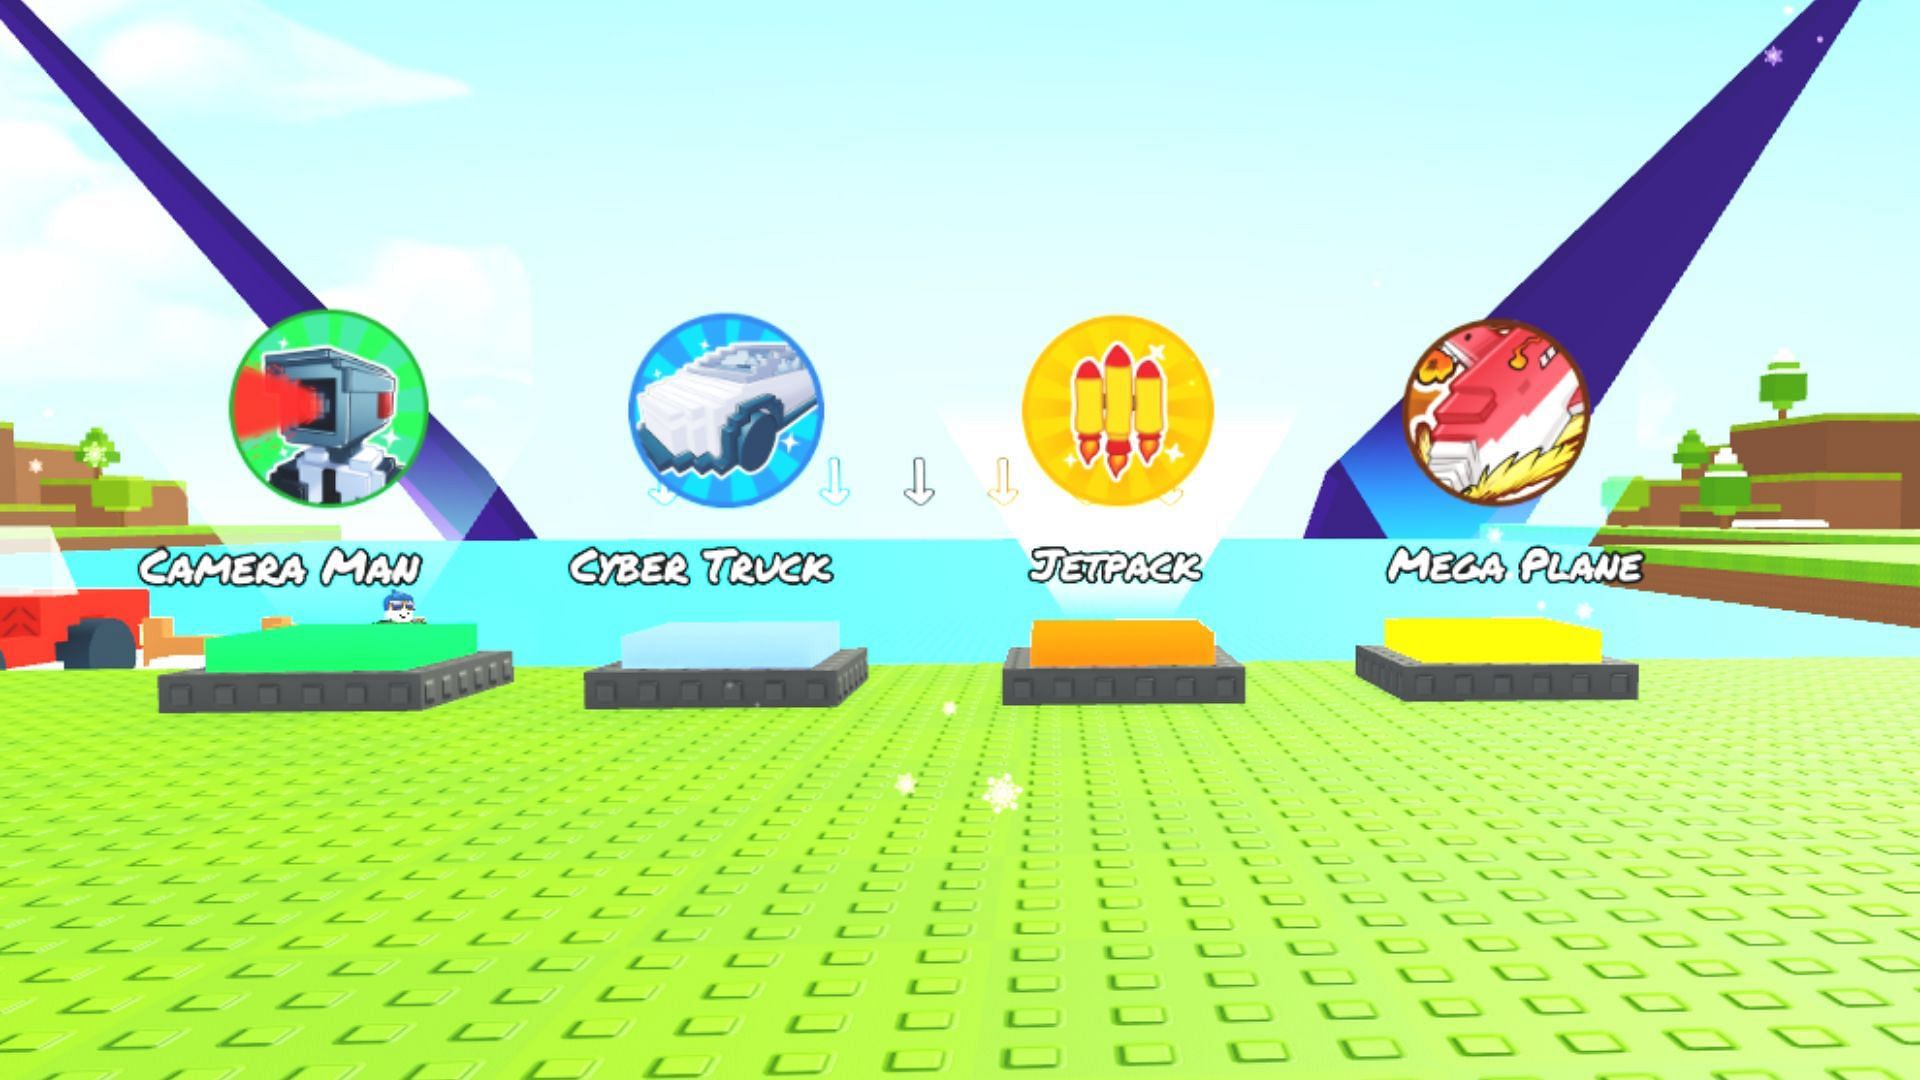 Slide Down A Hill features (Image via Roblox)